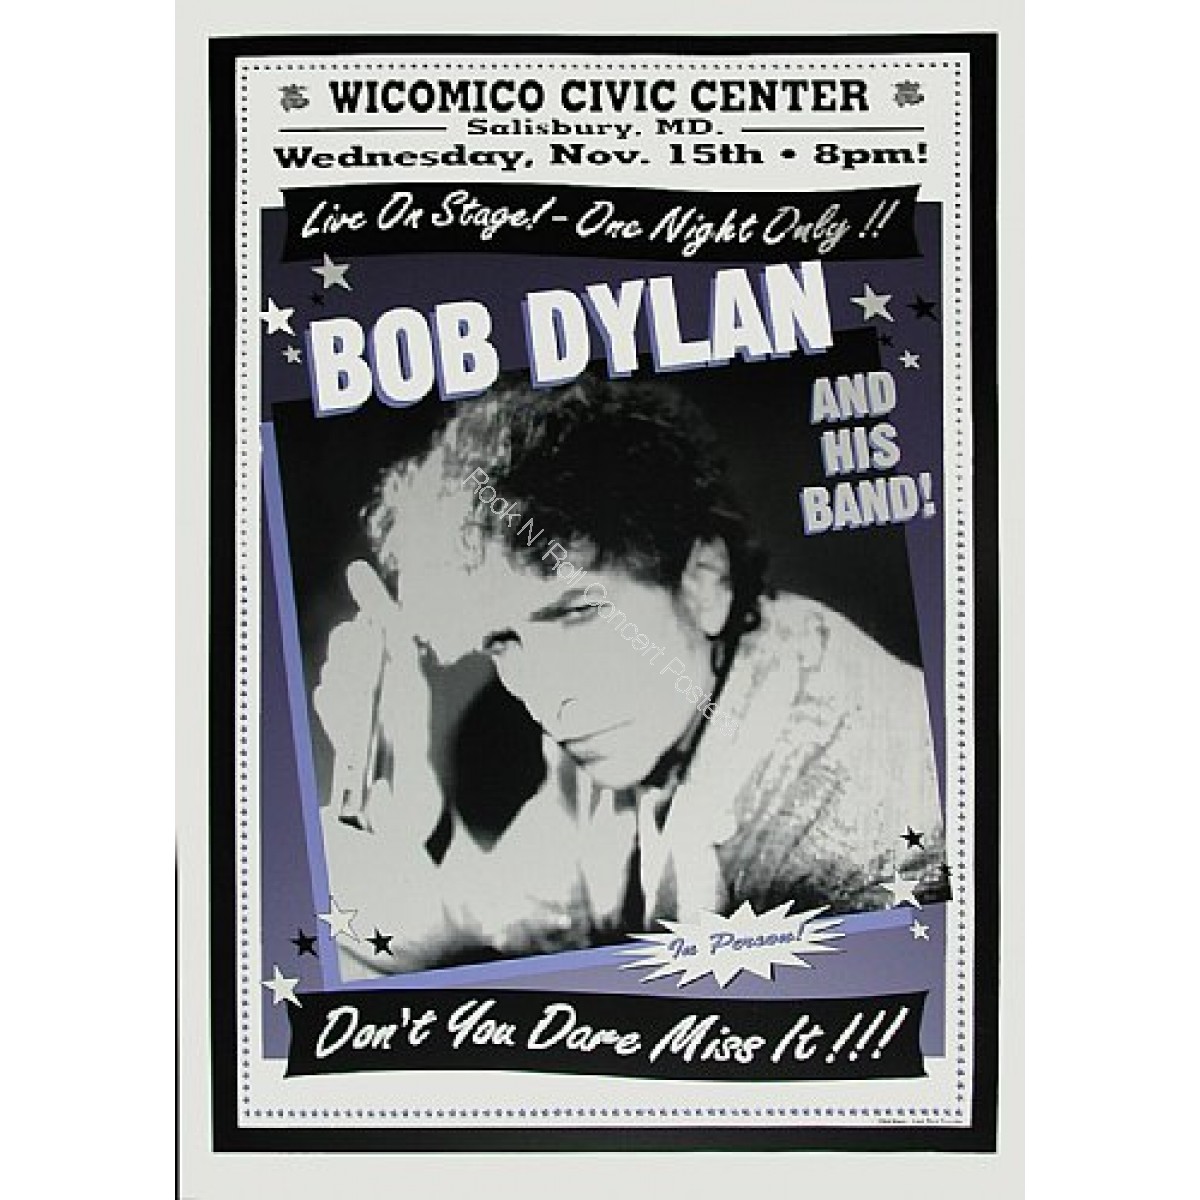 Bob Dylan & His Band @ The Wicomico Civic Center Salisbury Maryland 11/15/00 Official Limited Edition Poster of 200